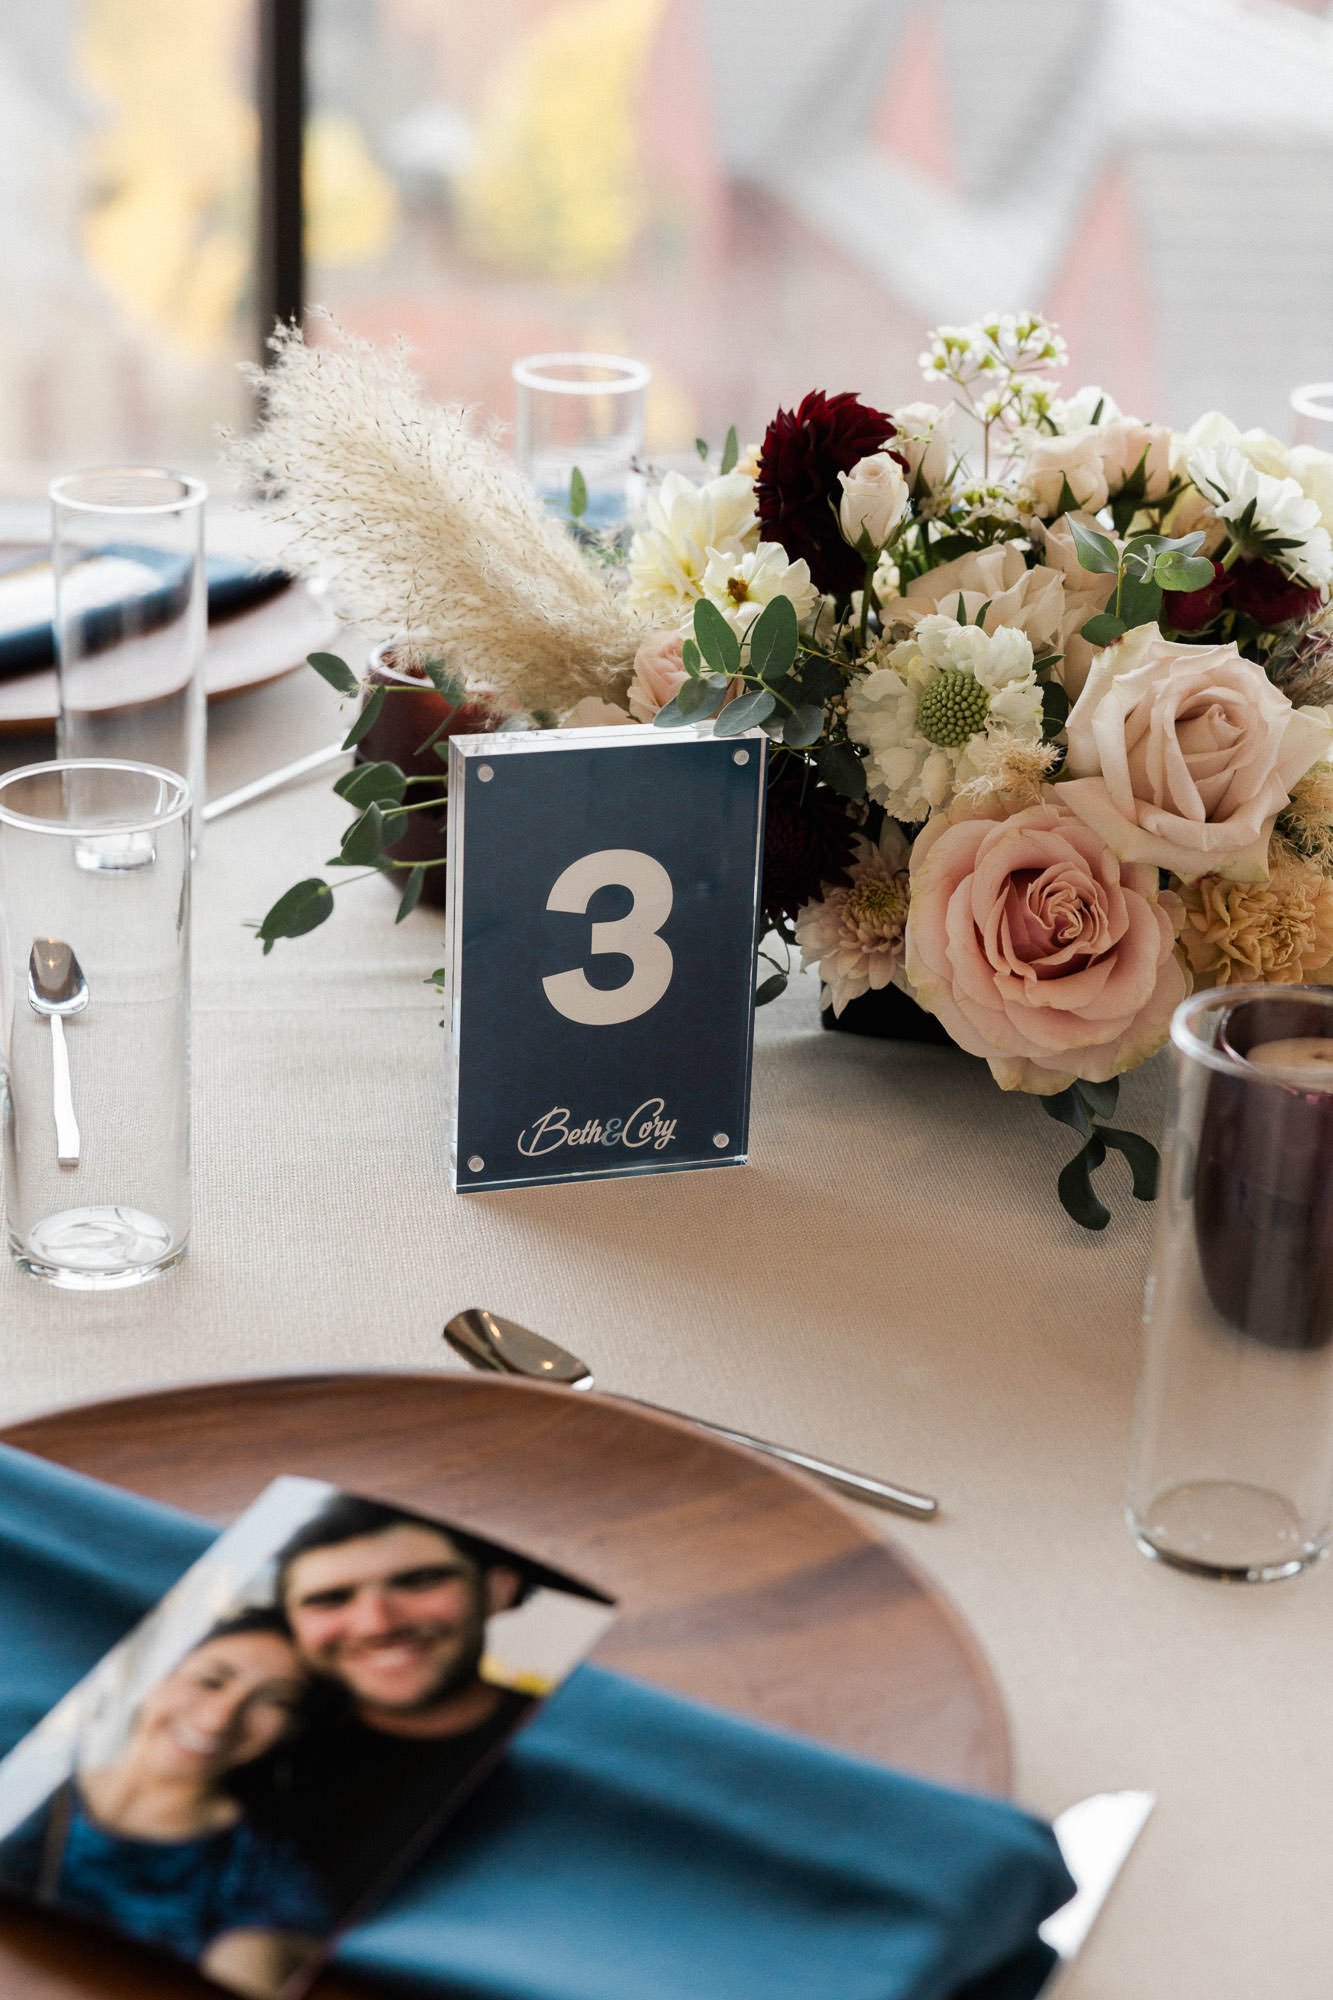 table setting at ironlight with place card, floral bouquet, water glasses, plate, and blue napkin